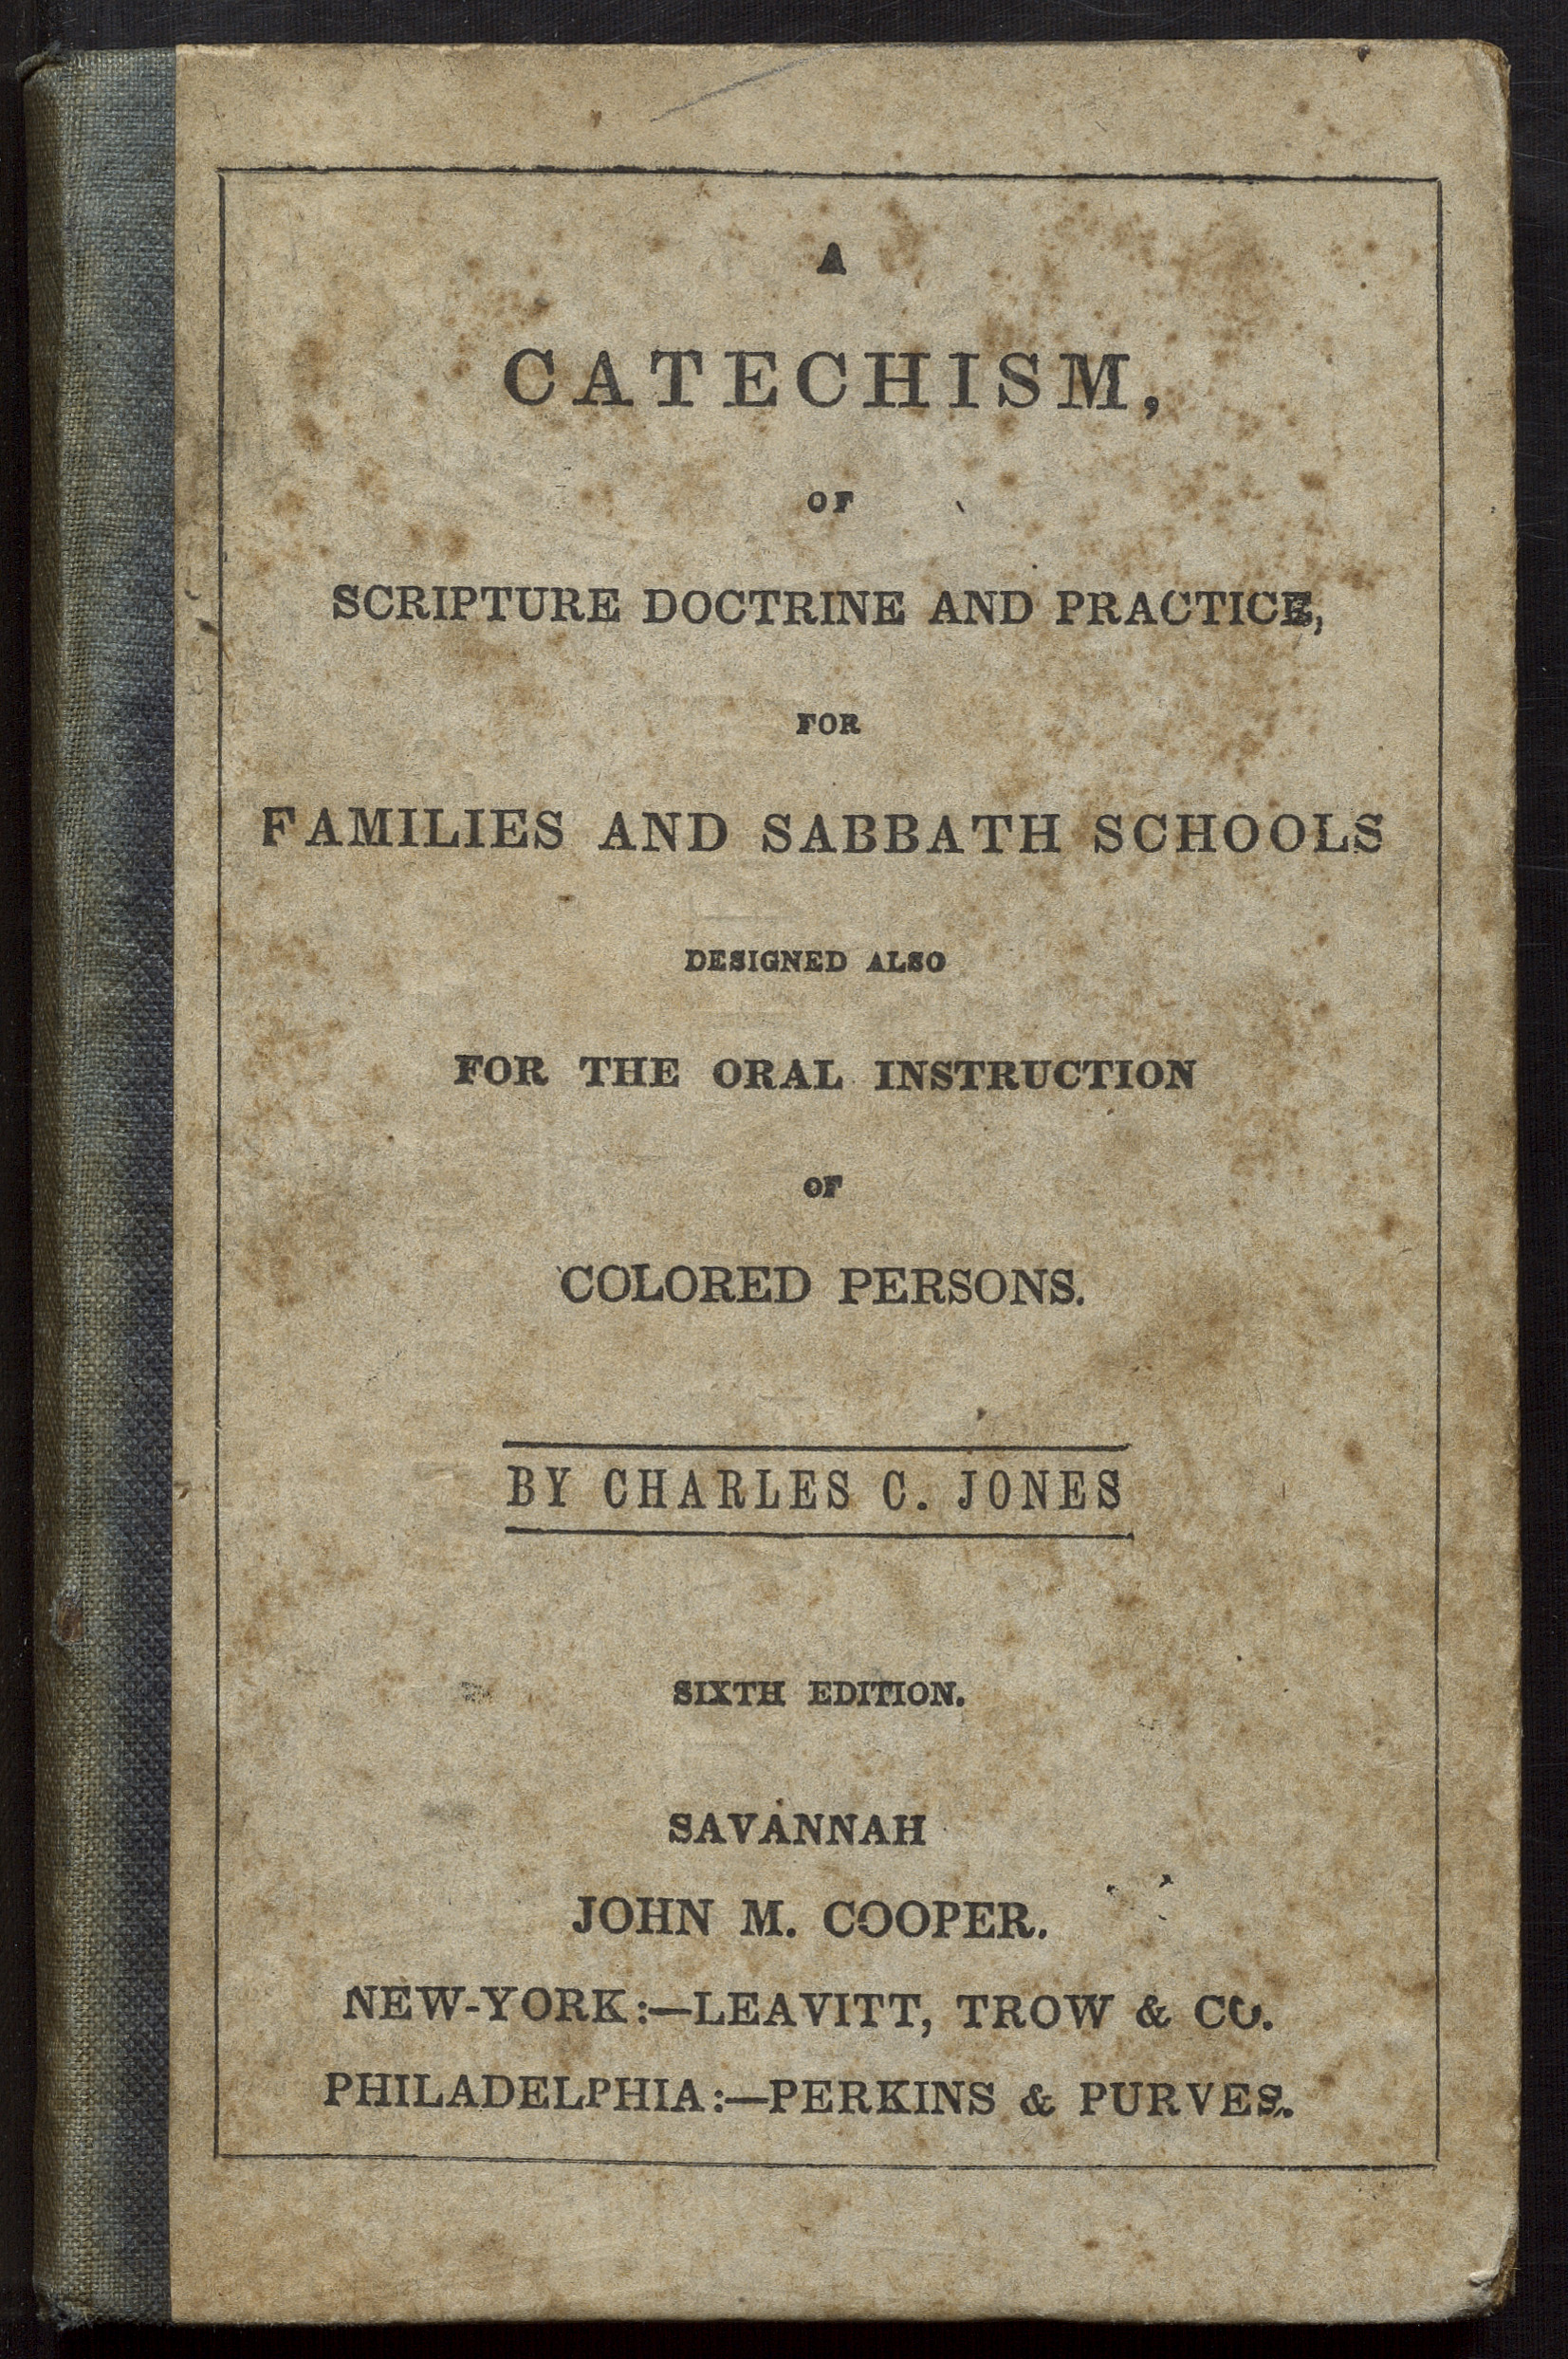 A Catechism, of Scripture Doctrine and Practice, for Families and Sabbath Schools: Designed Also for the Oral Instruction of Colored Persons, c.1844. Content compilation © 2020, by the American Antiquarian Society. All rights reserved.